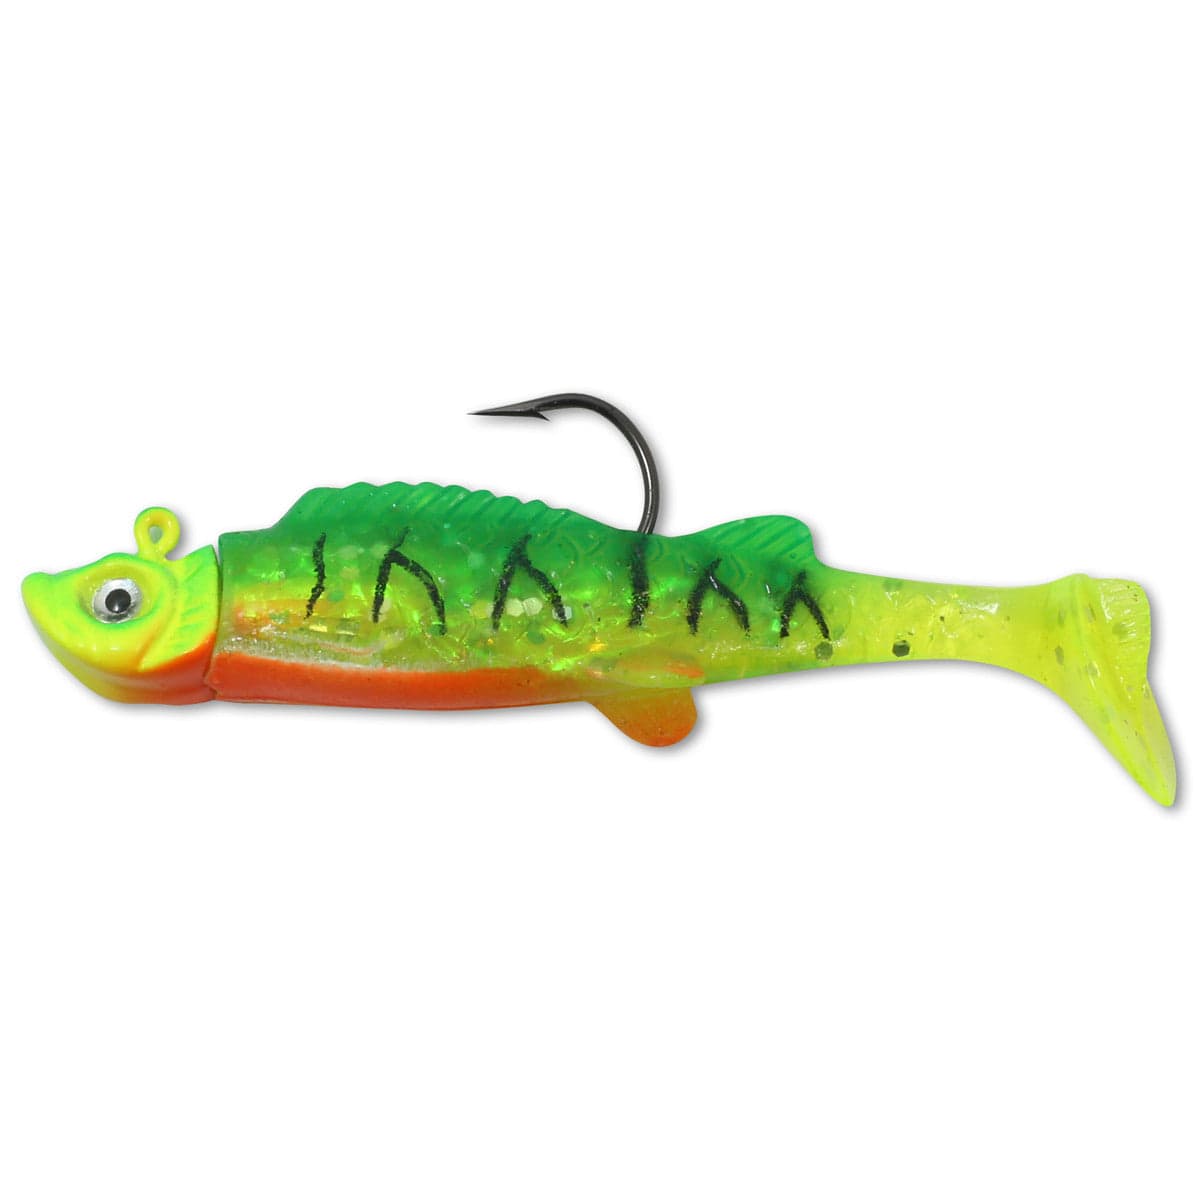 Northland Tackle Eye Candy Minnow Floating 3 Soft Plastic Fishing Lure for  Walleye Fishing, 5 Baits Per Pack, Sunrise, Soft Plastic Lures -   Canada